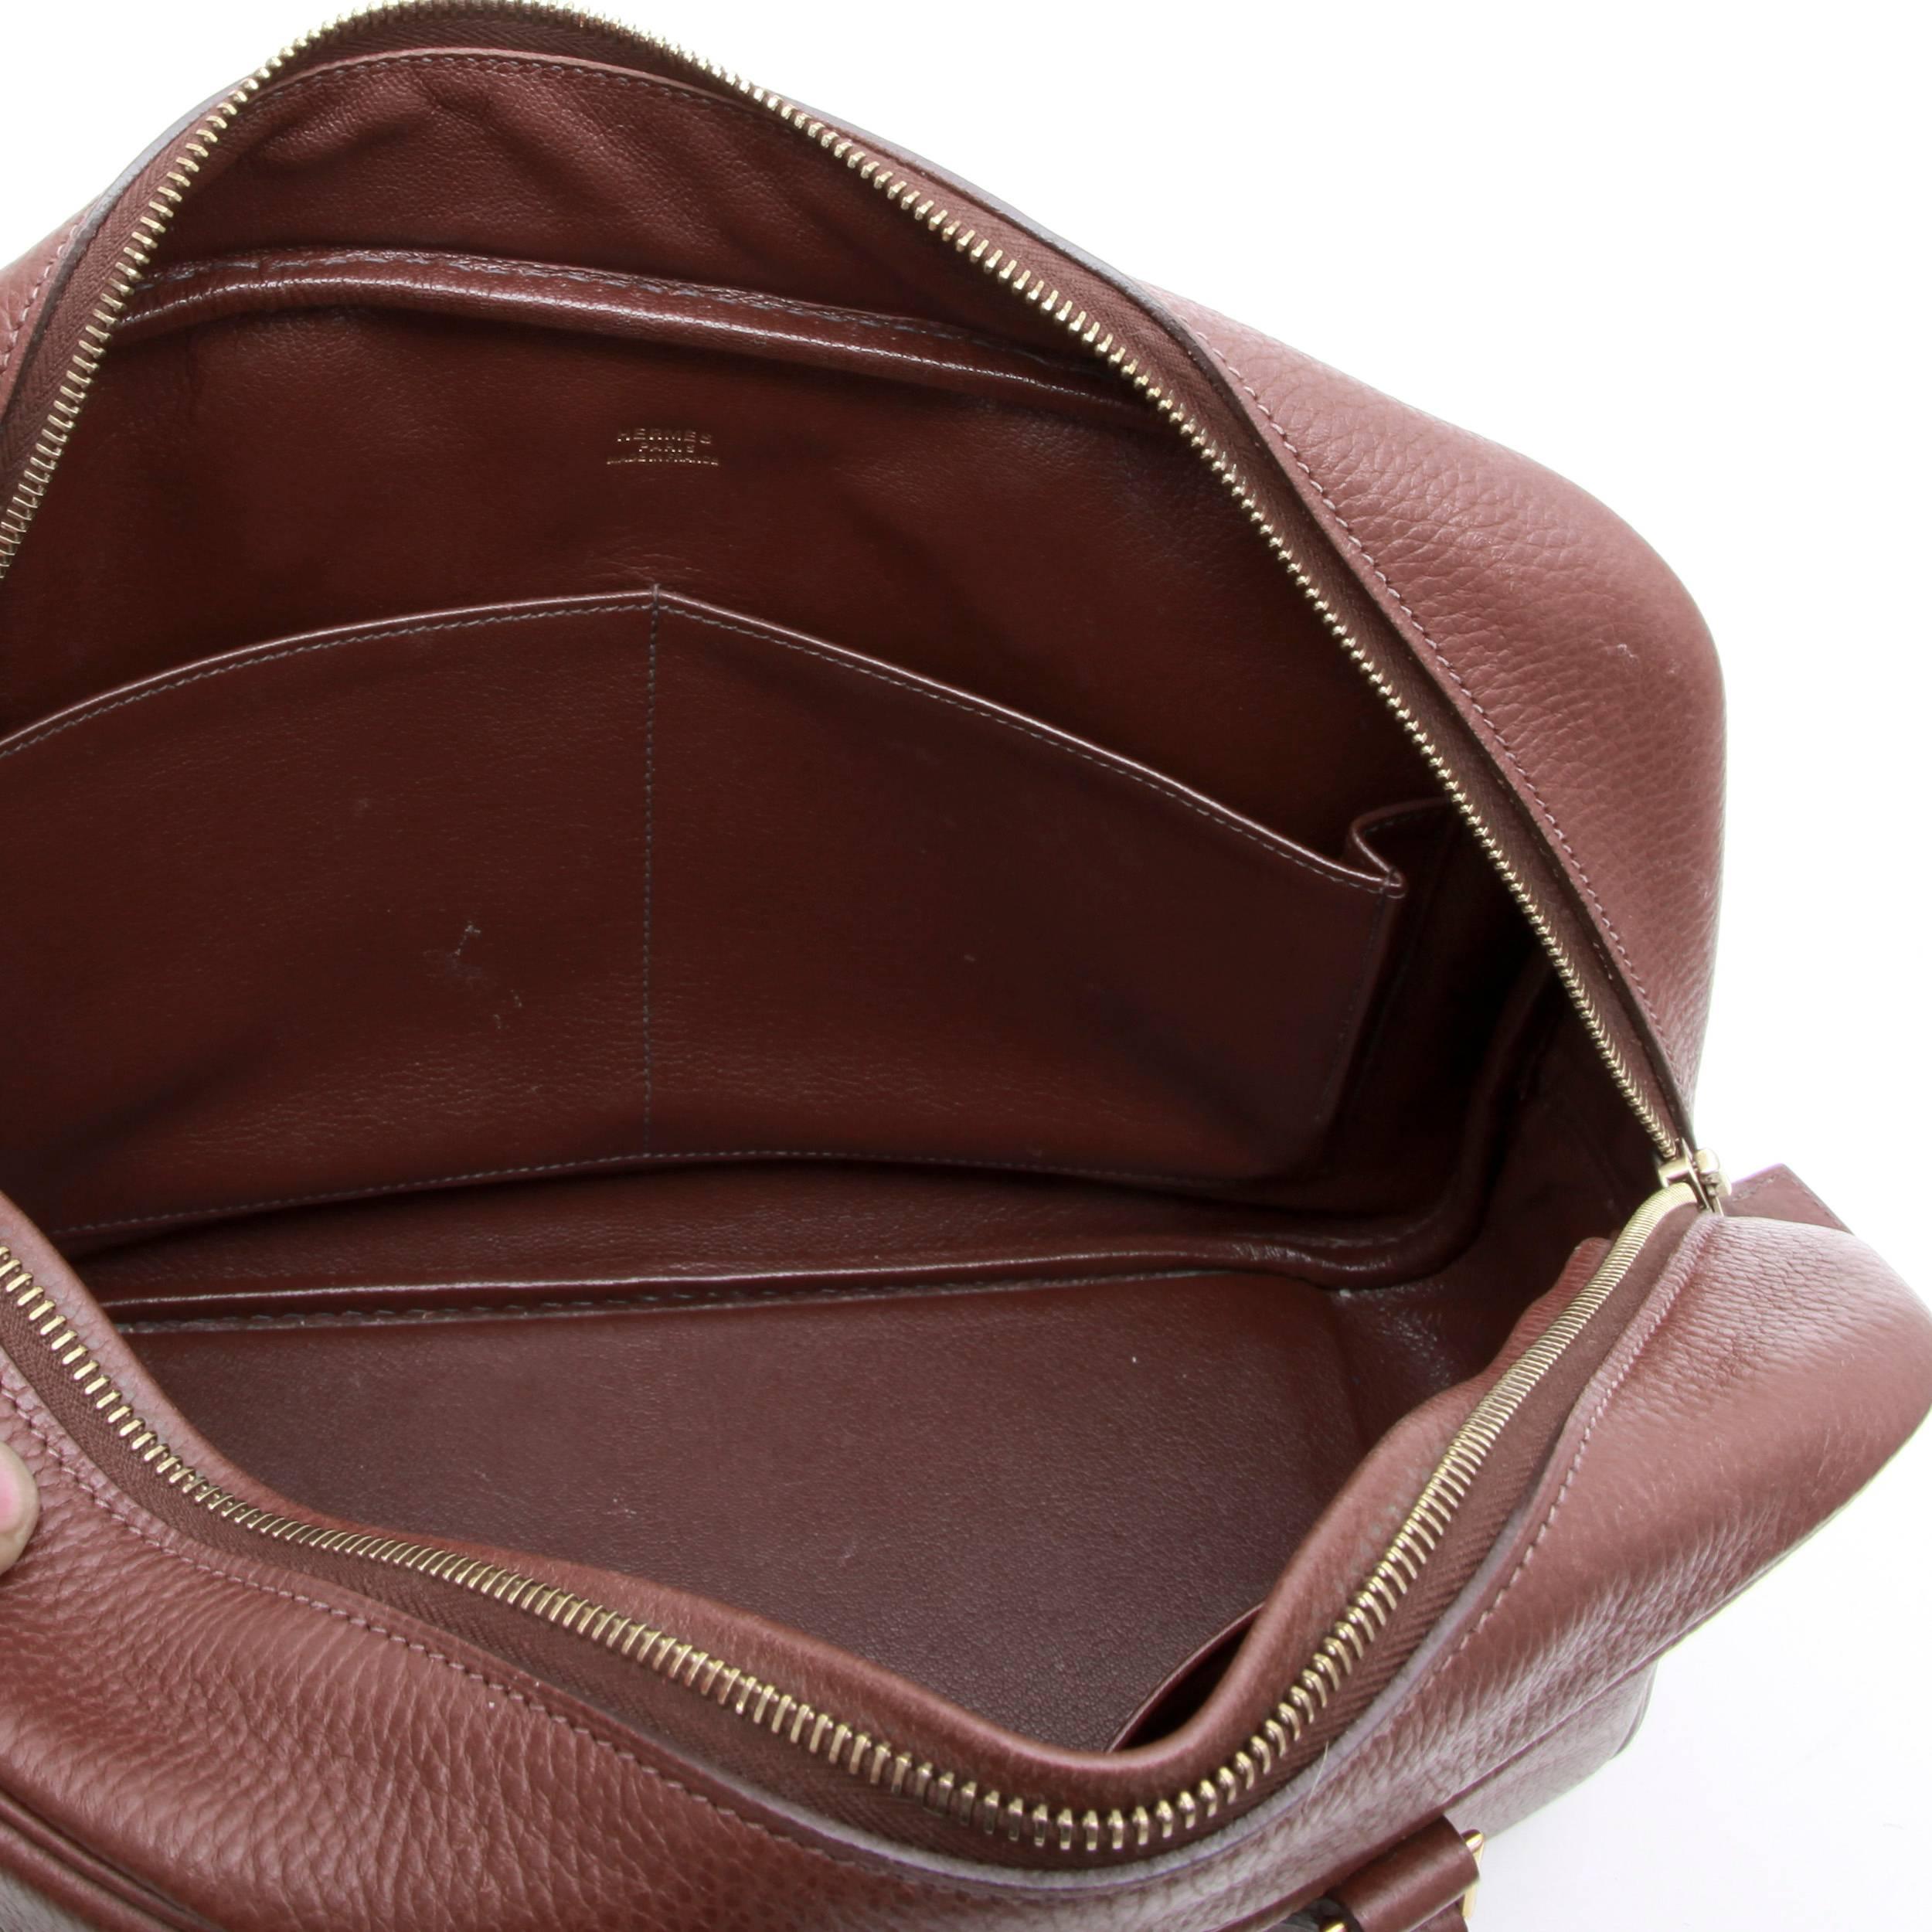 HERMES 'plume' Bag in Brown Grained Leather 2